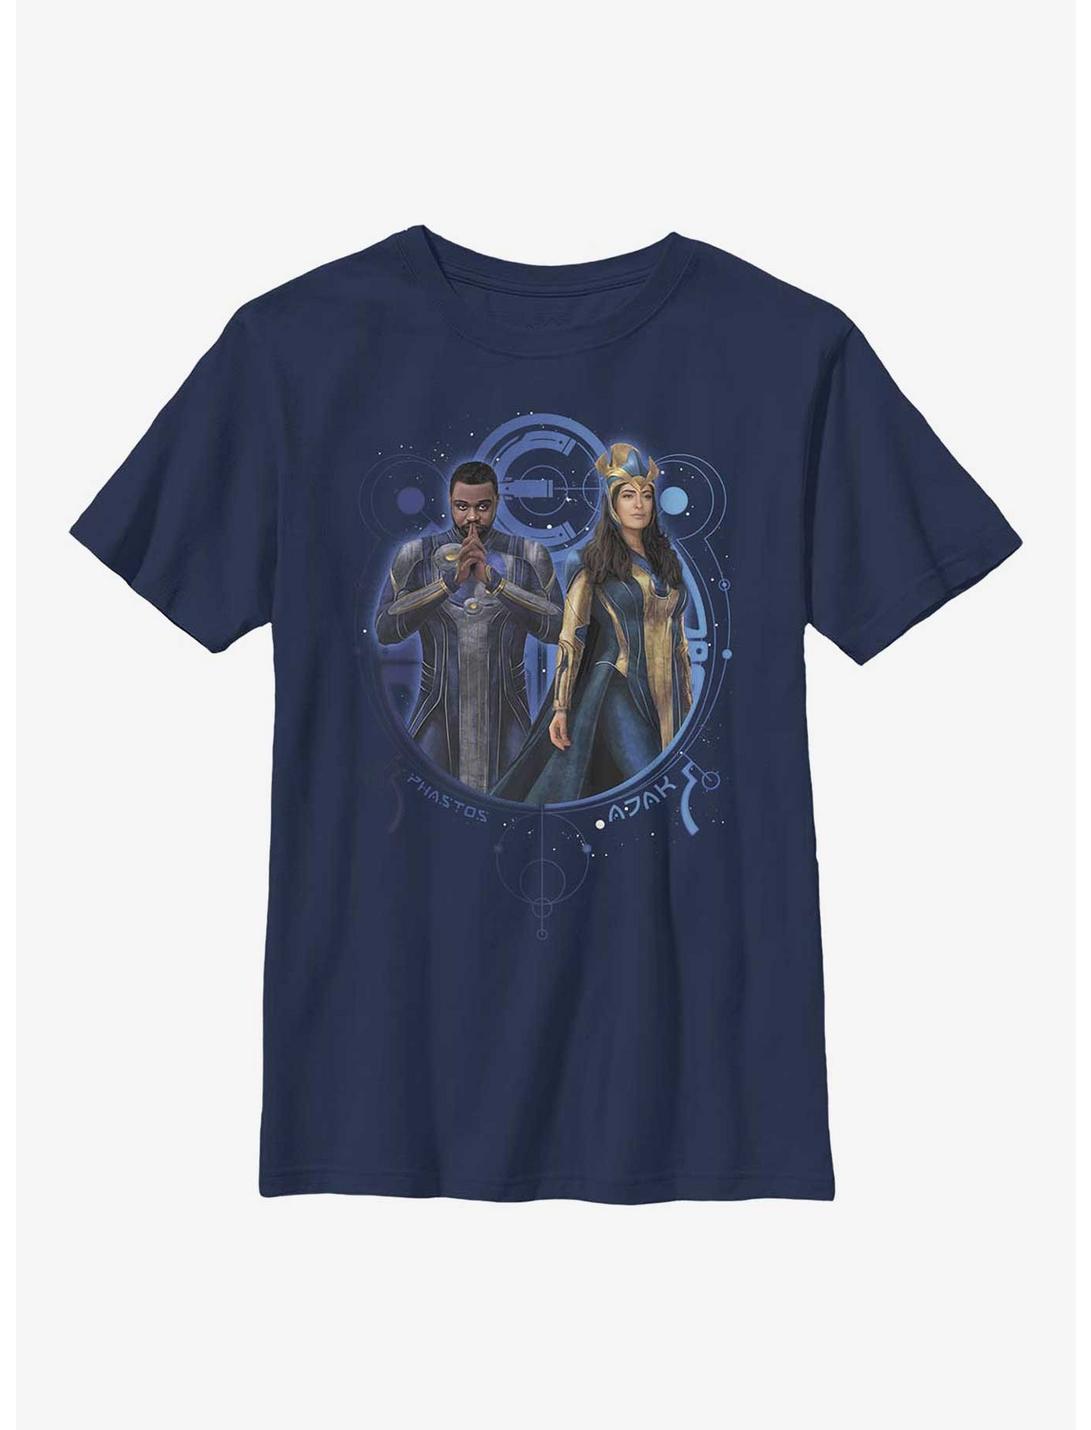 Marvel Eternals Phastos & Ajak Duo Youth T-Shirt, NAVY, hi-res